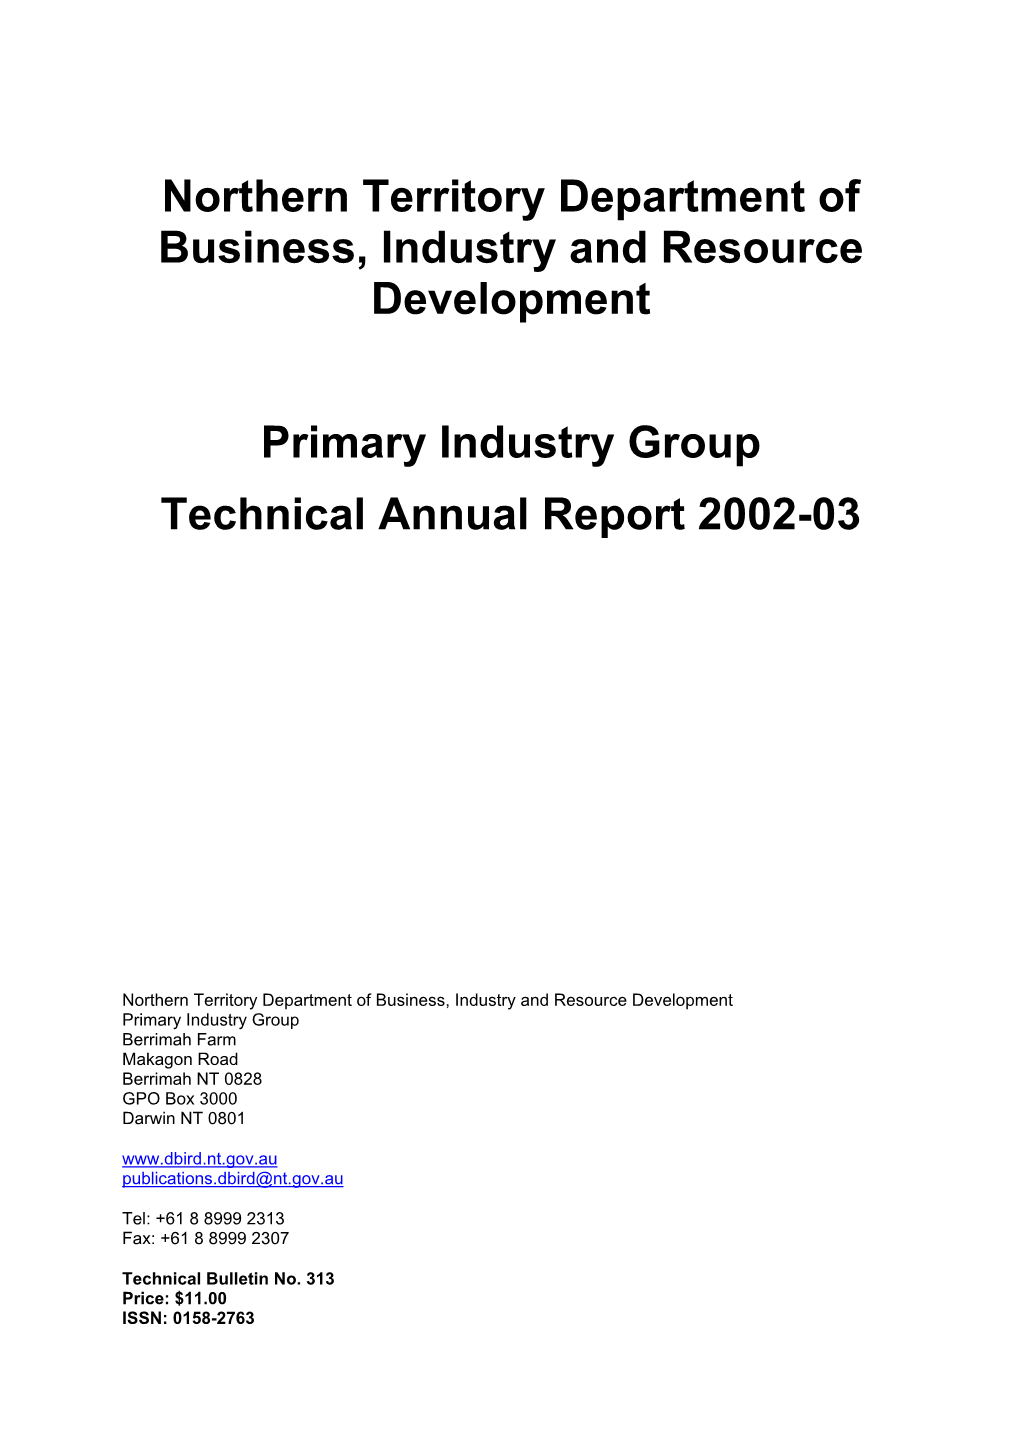 Technical Annual Report 2002/03